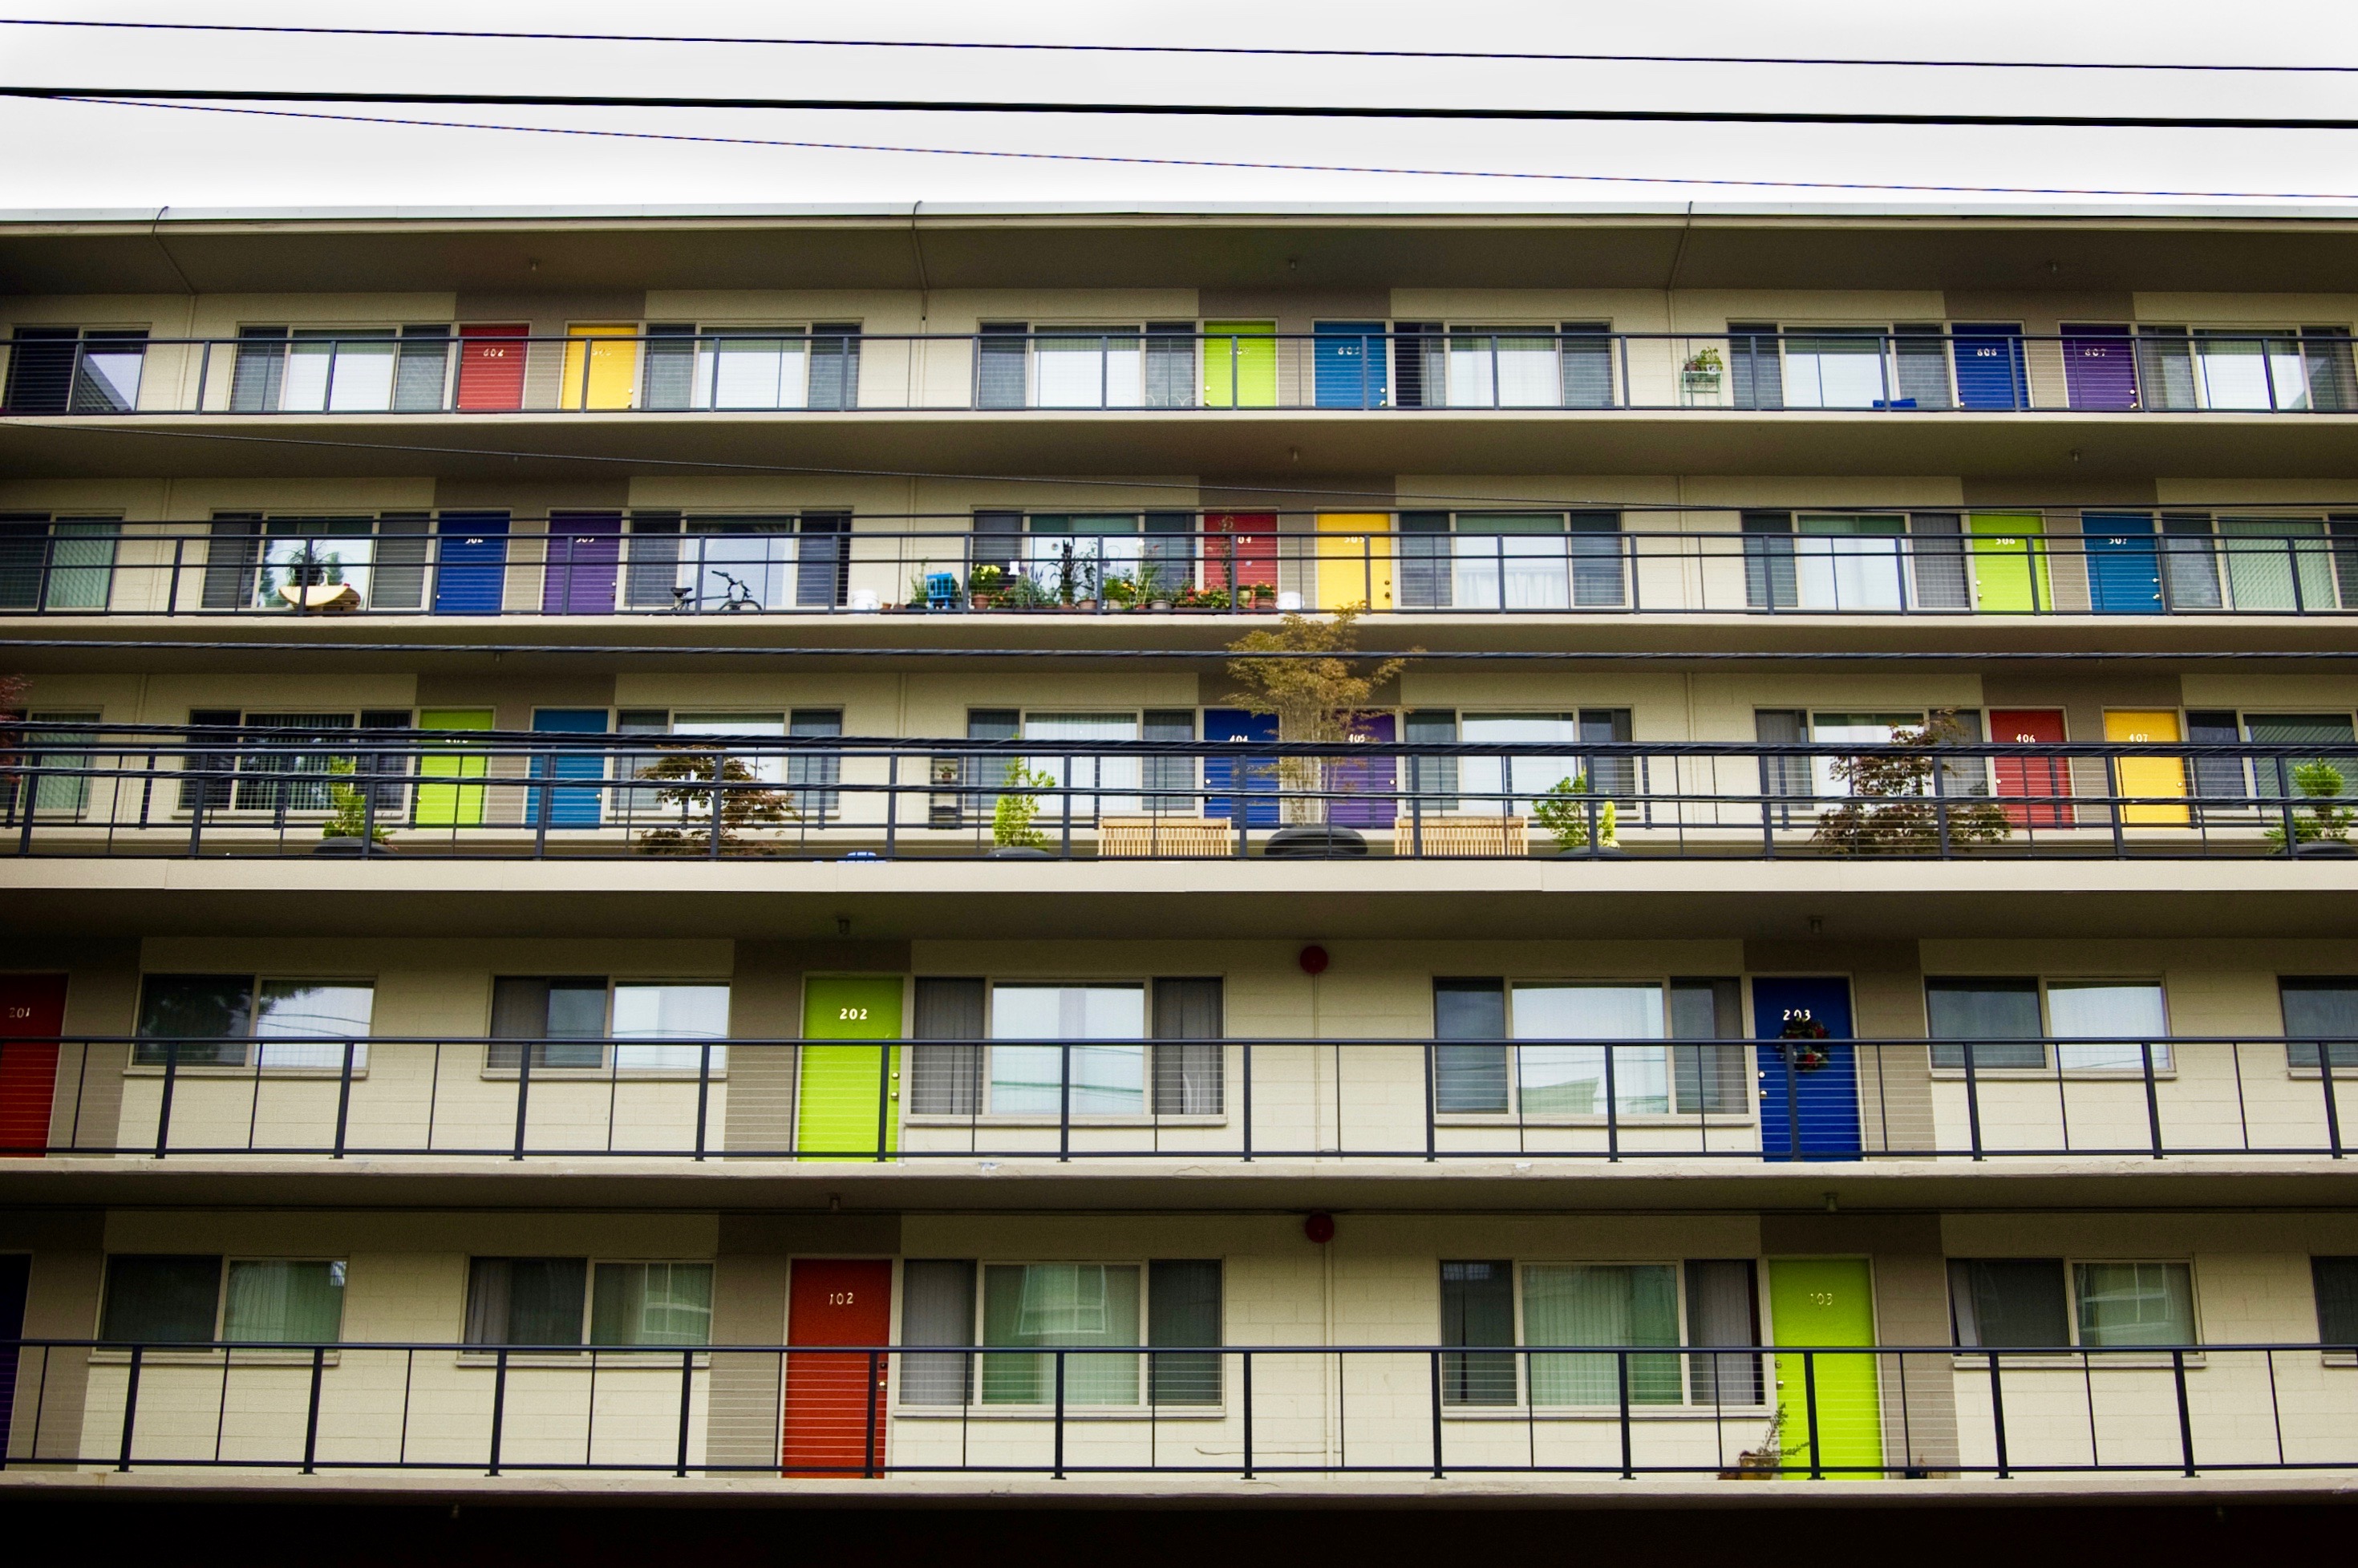 An apartment building with outside entrances to the units and colorful doors—red, yellow, green, blue, and purple.